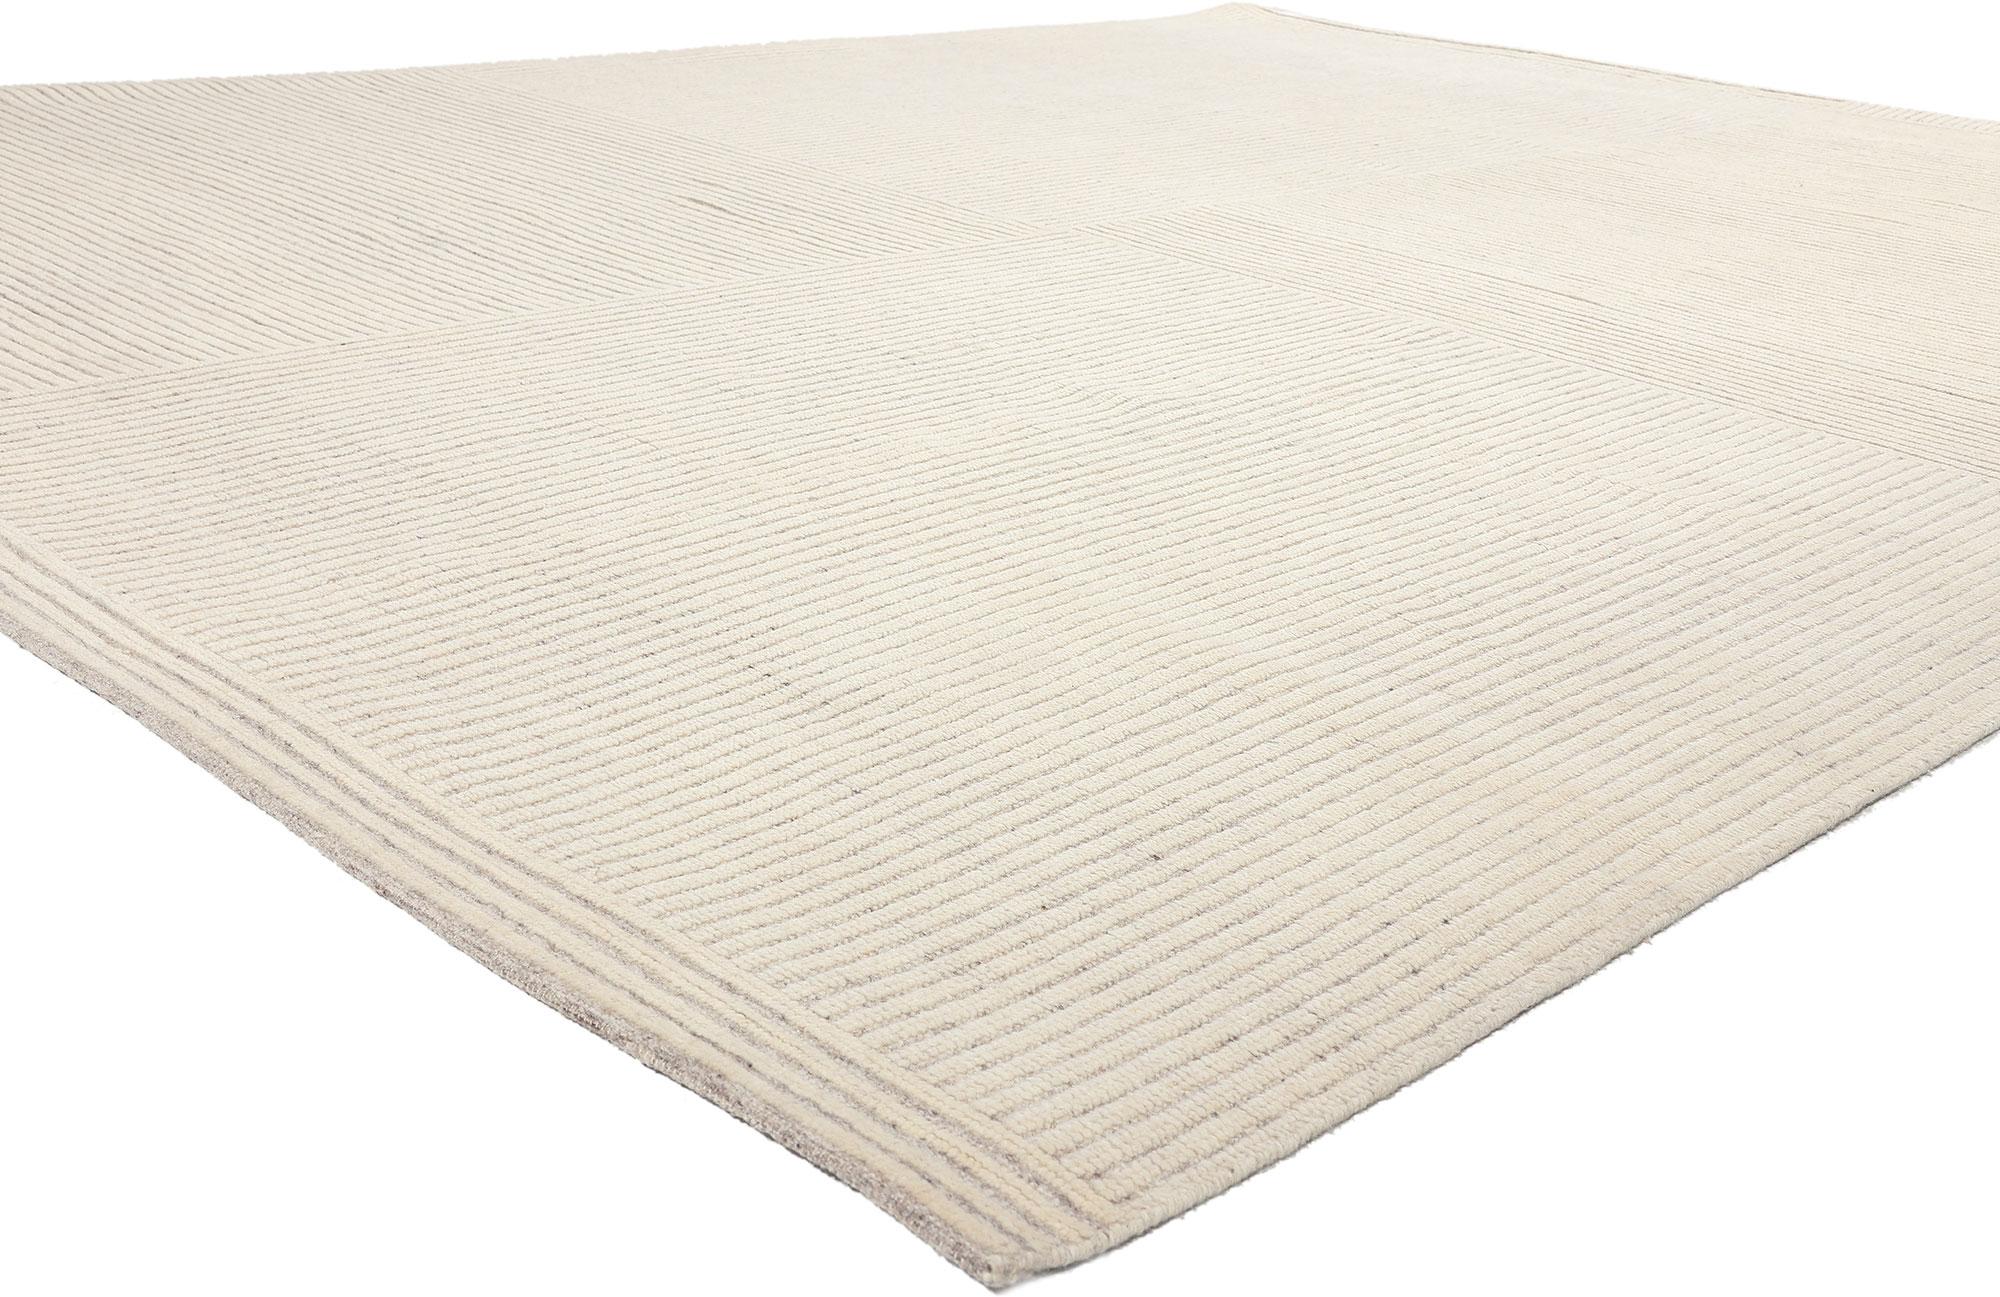 30987 Organic Modern High-Low Rug, 09'03 x 11'10.
Subtle Shibui meets cohesive coziness in this organic modern high-low rug. The mesmerizing linear pattern and neutral color palette woven into this piece work together resulting a a simple,